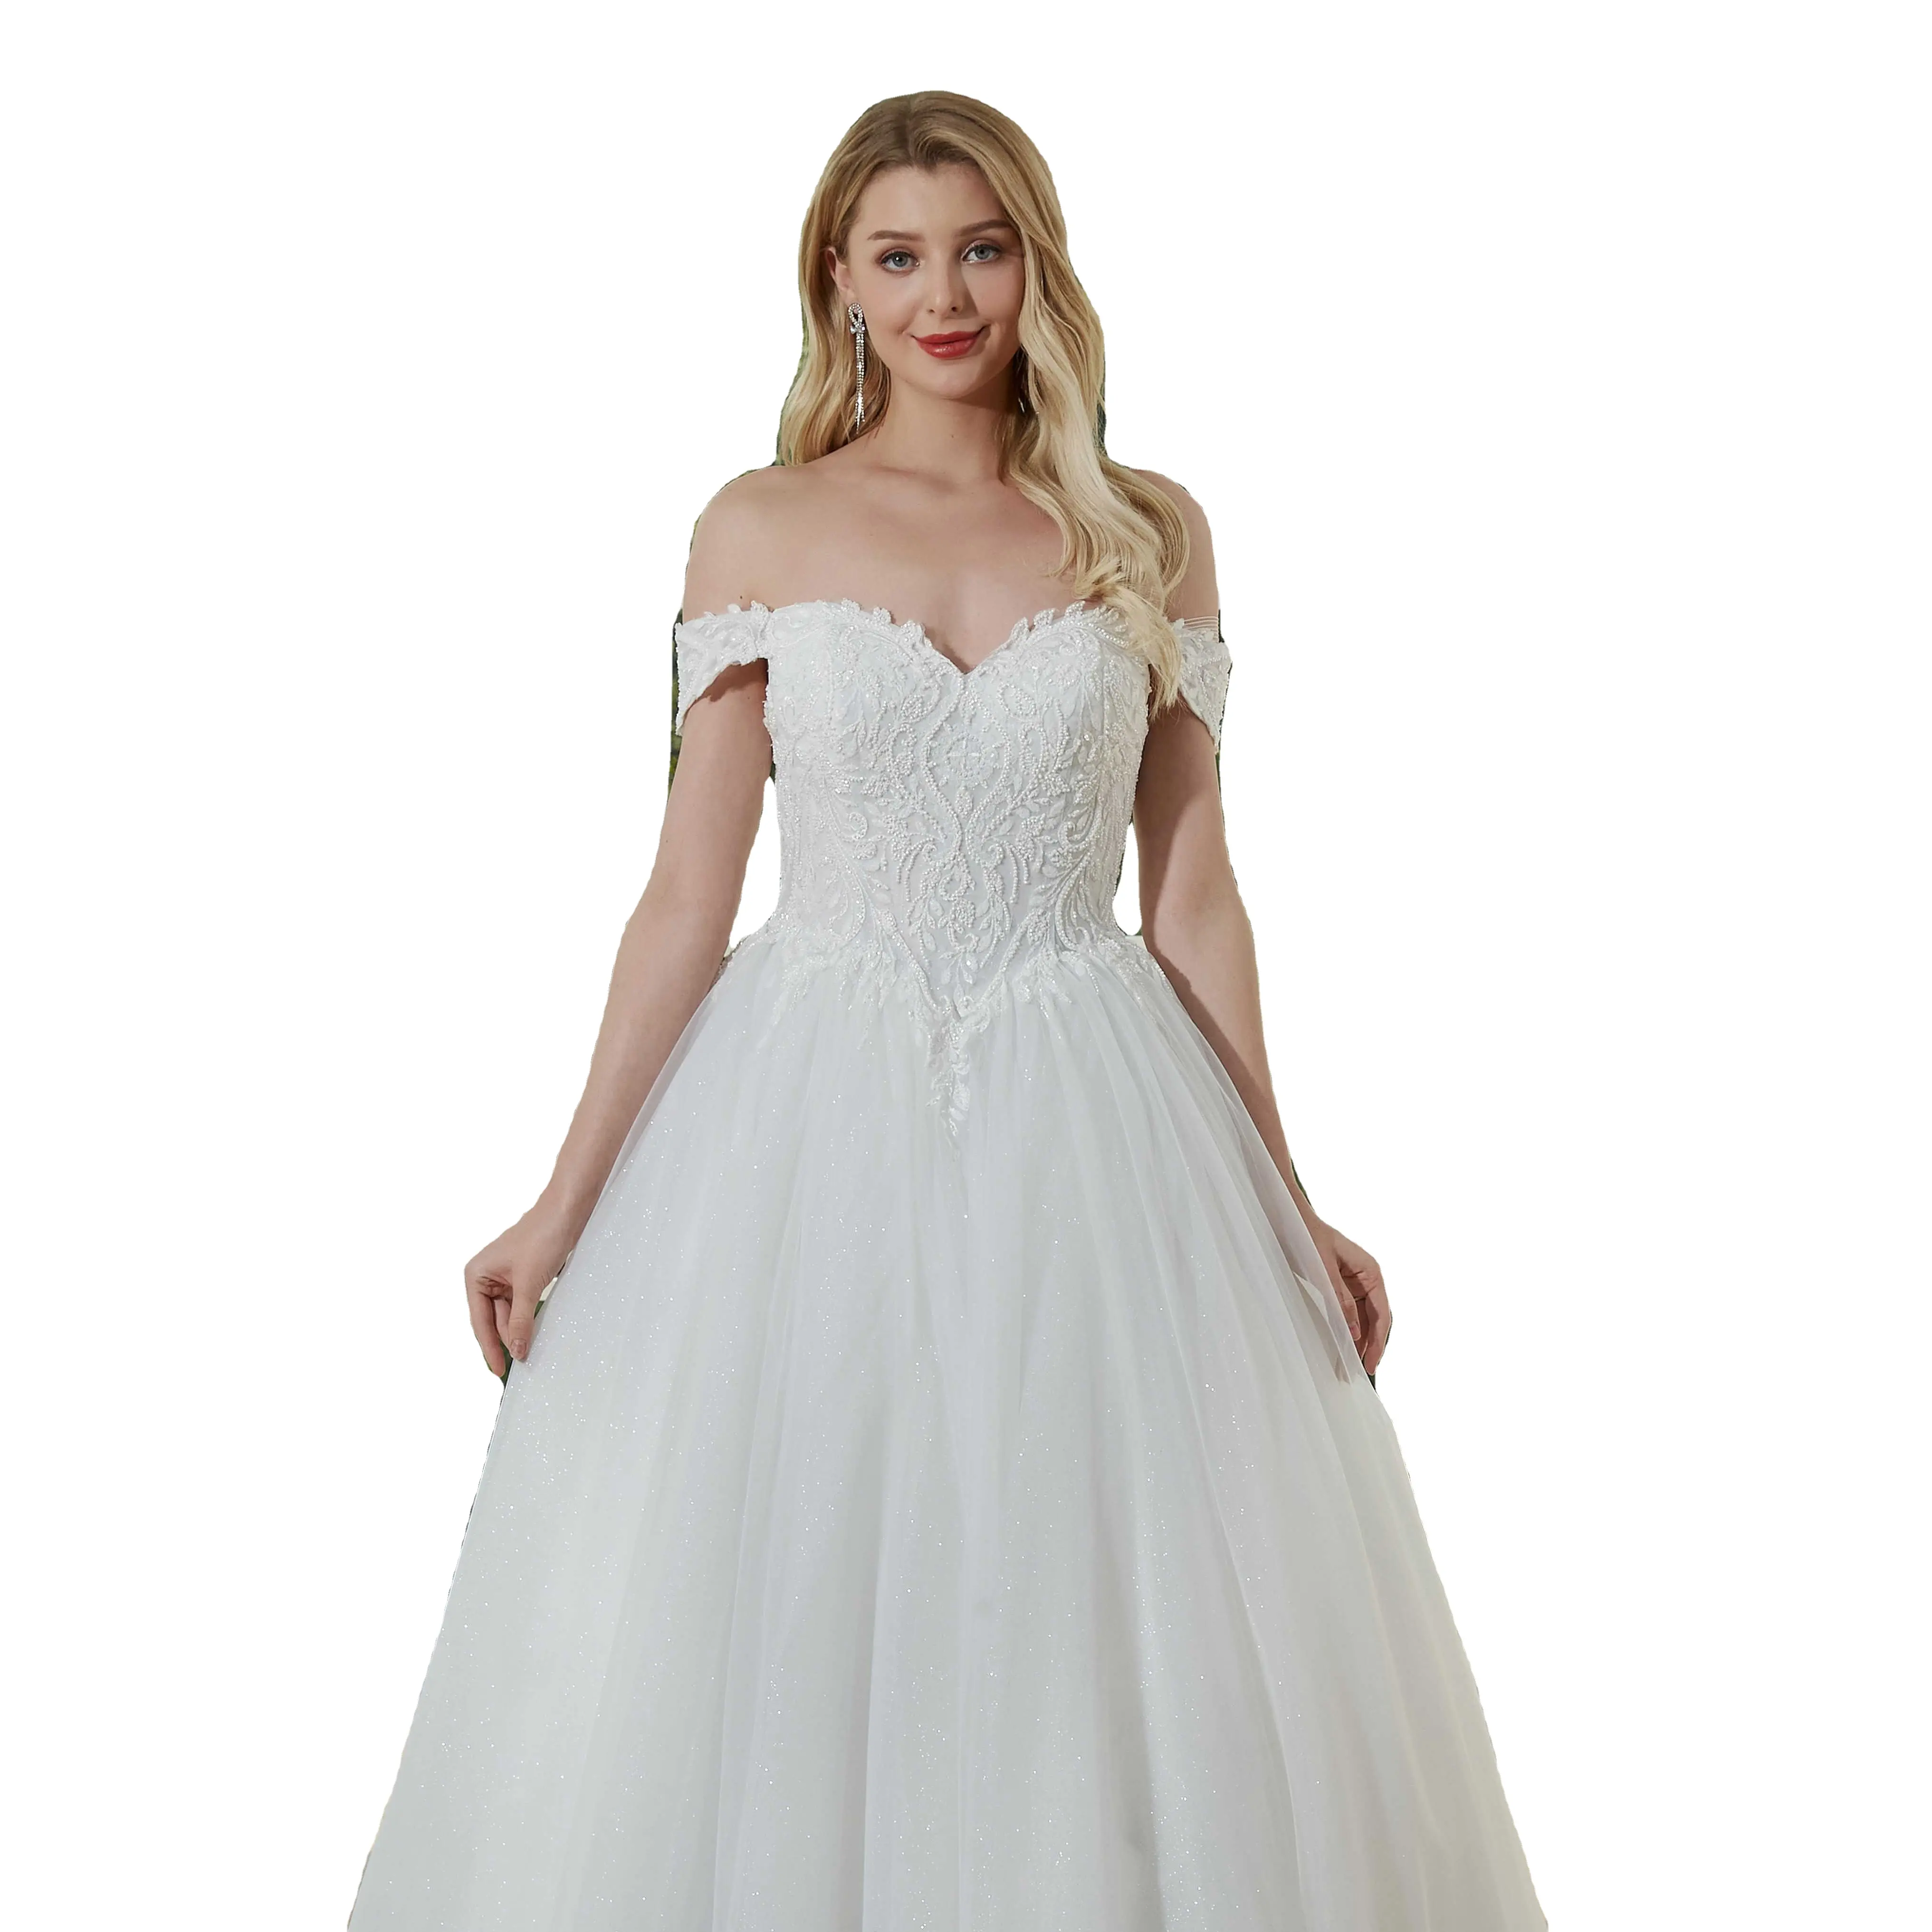 WT4180 Quality Princess Ball Gown With Lace Wedding Dress Floor Length A Line Wedding Dress